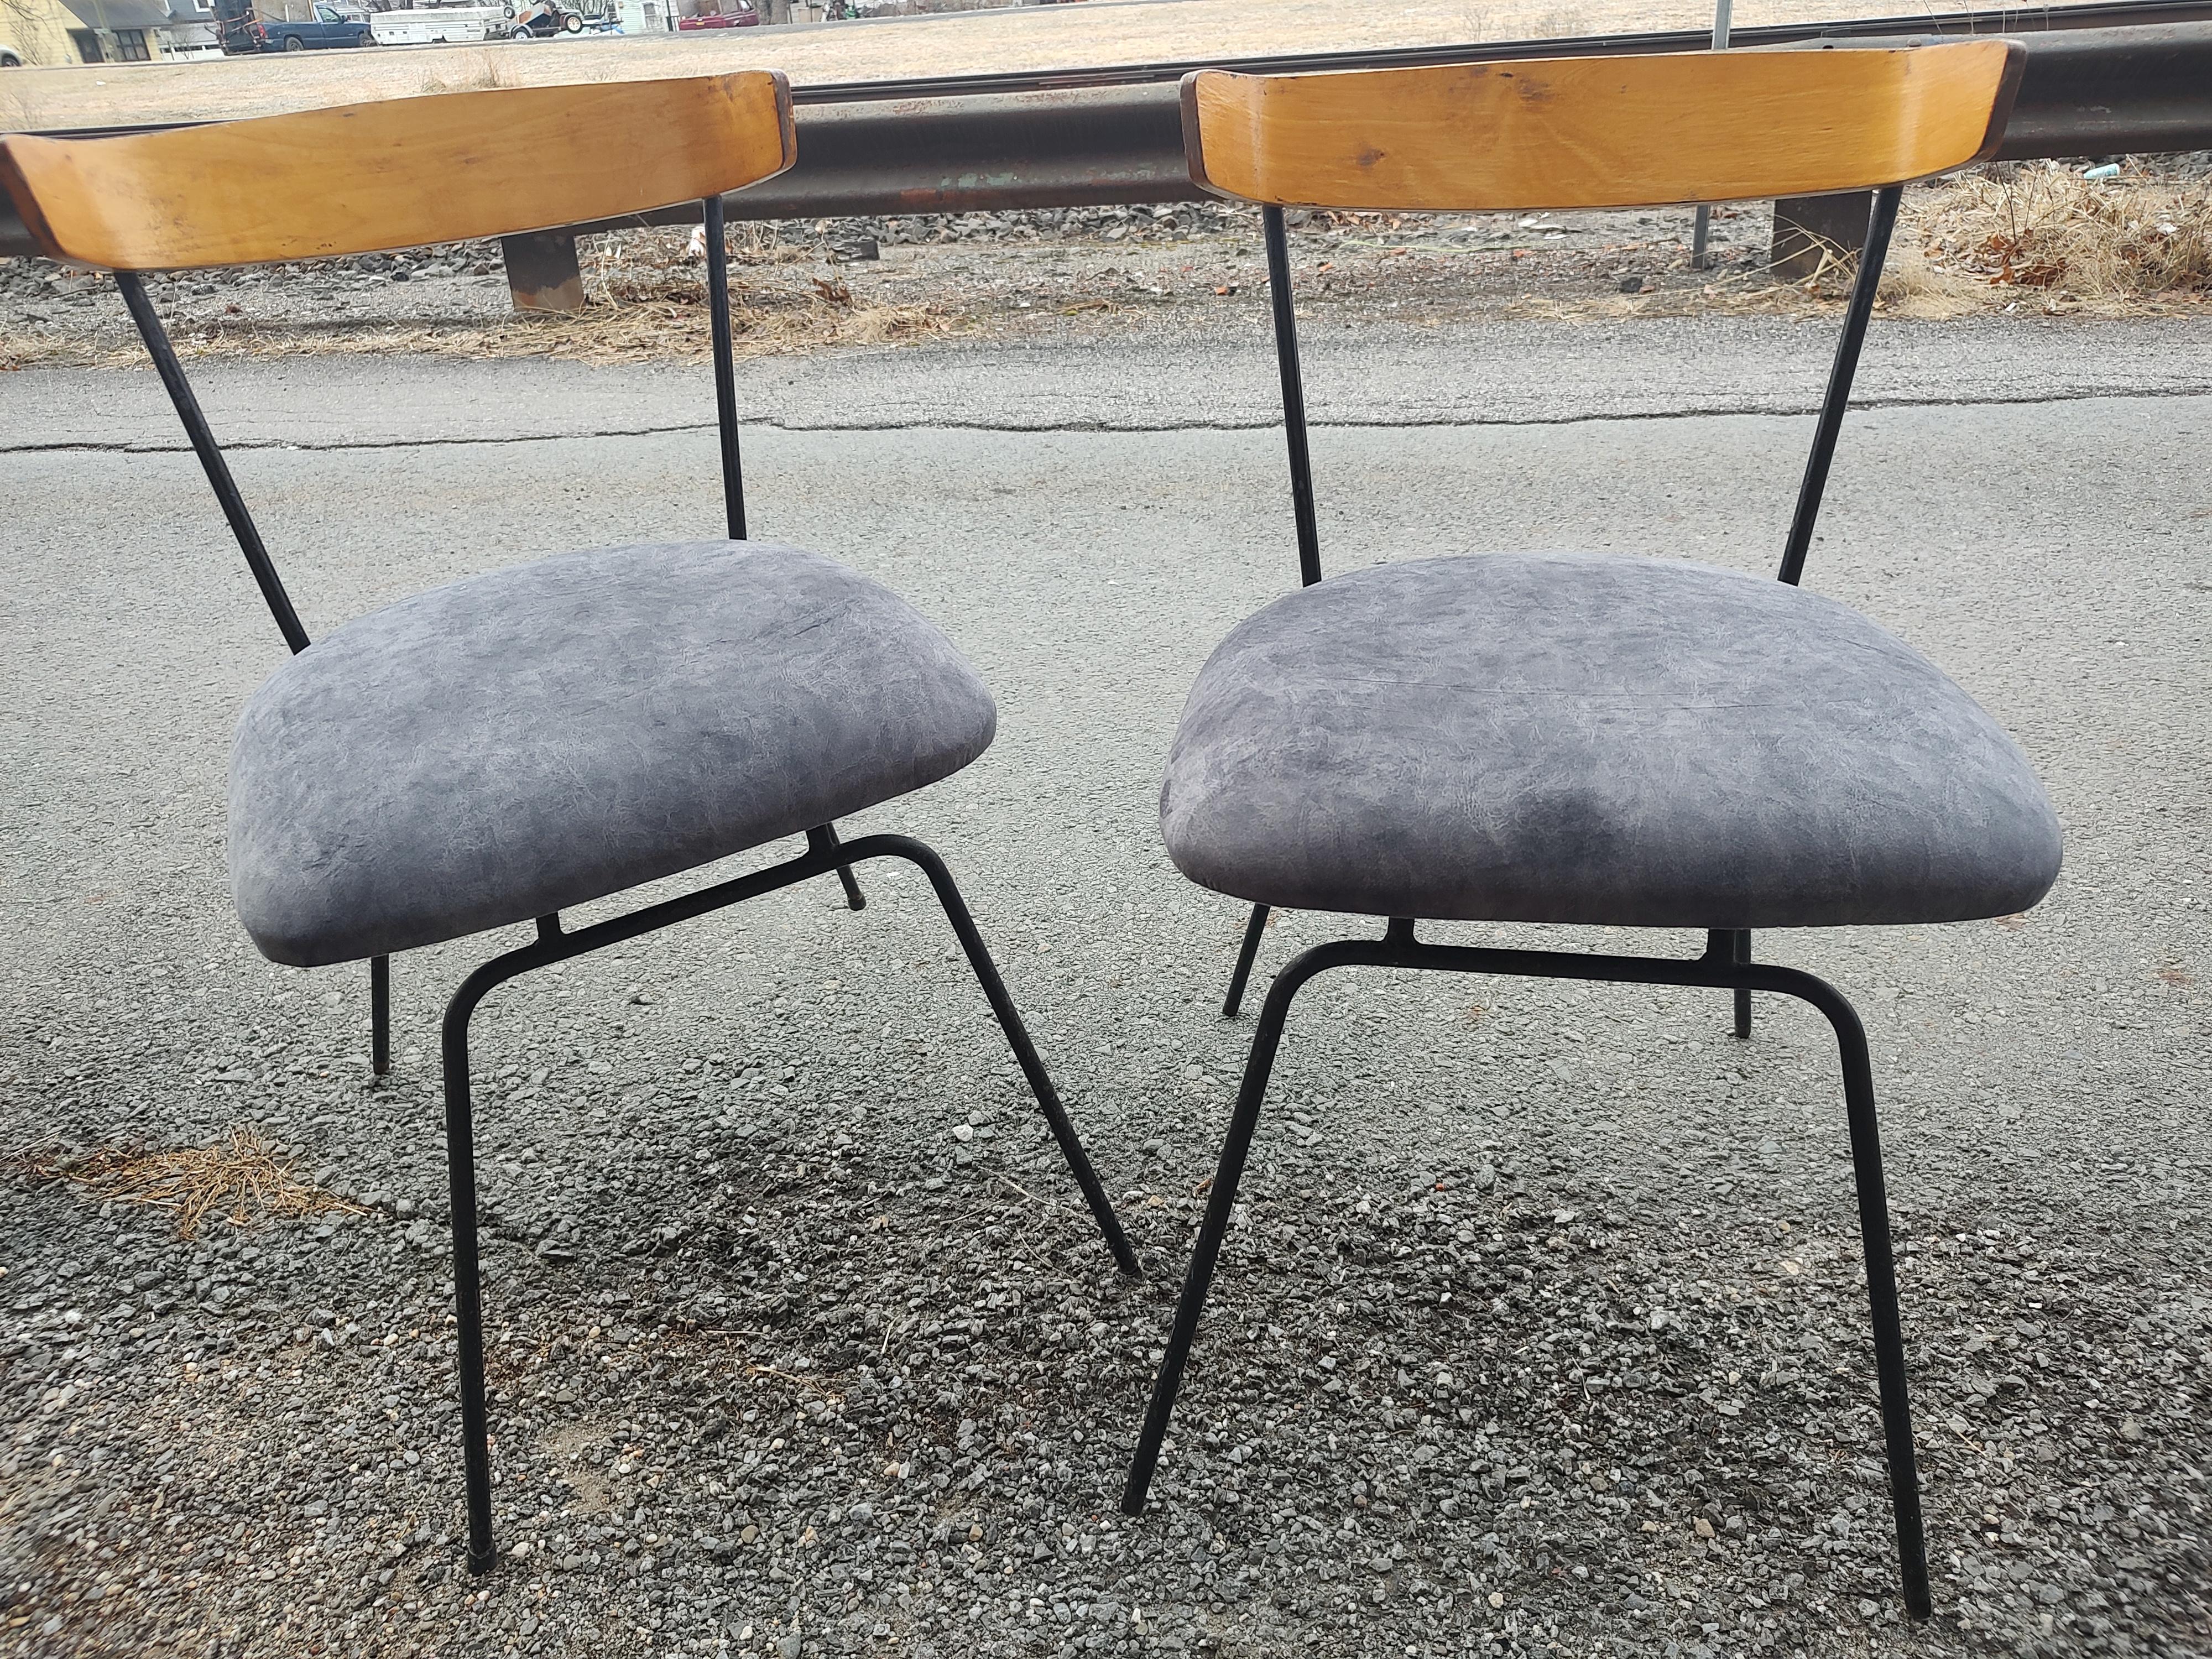 Pair of Mid Century Modern Iron with Wood Dining Chairs by Clifford Pascoe C1960 For Sale 2